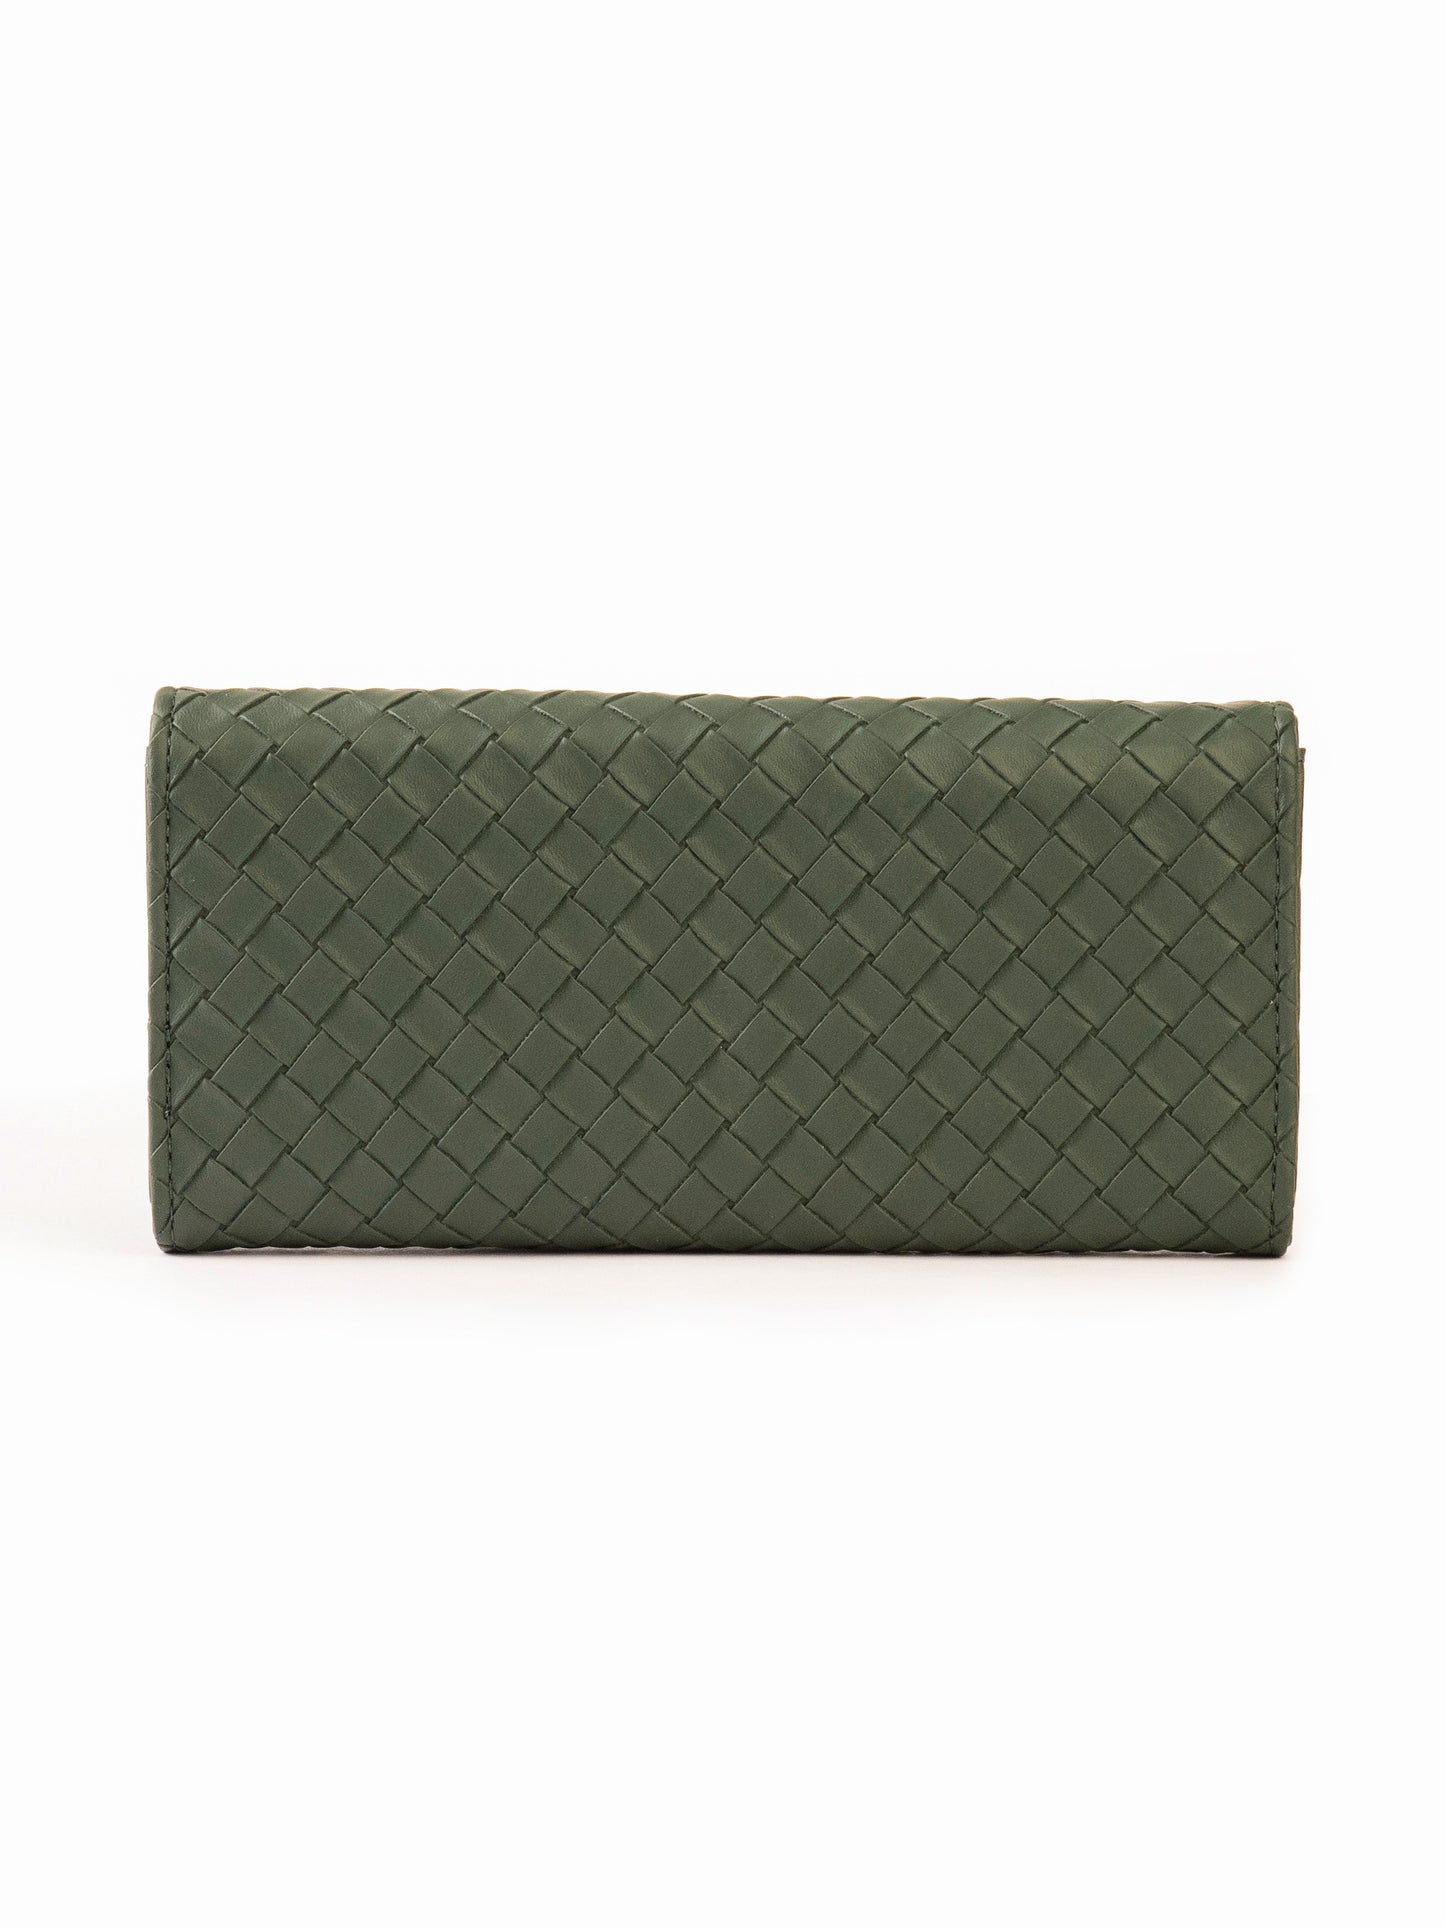 Straw Patterned Wallet